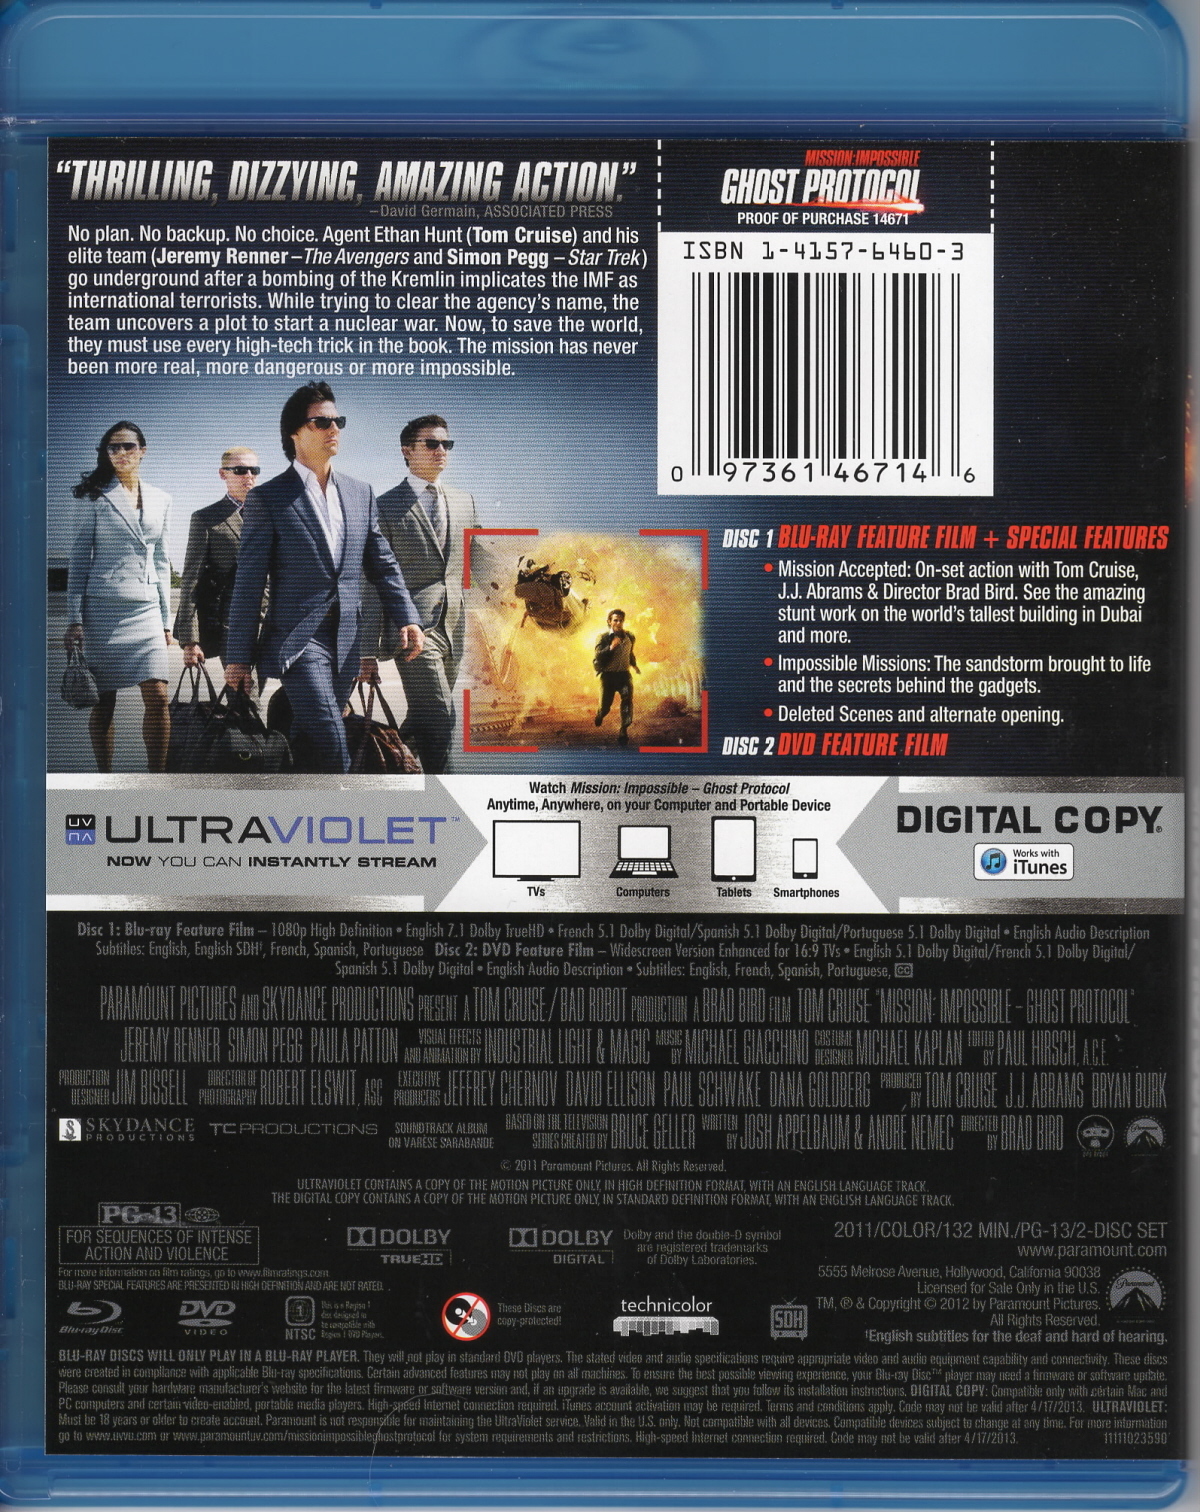 mission impossible 4 ghost protocol 720p english subtitles